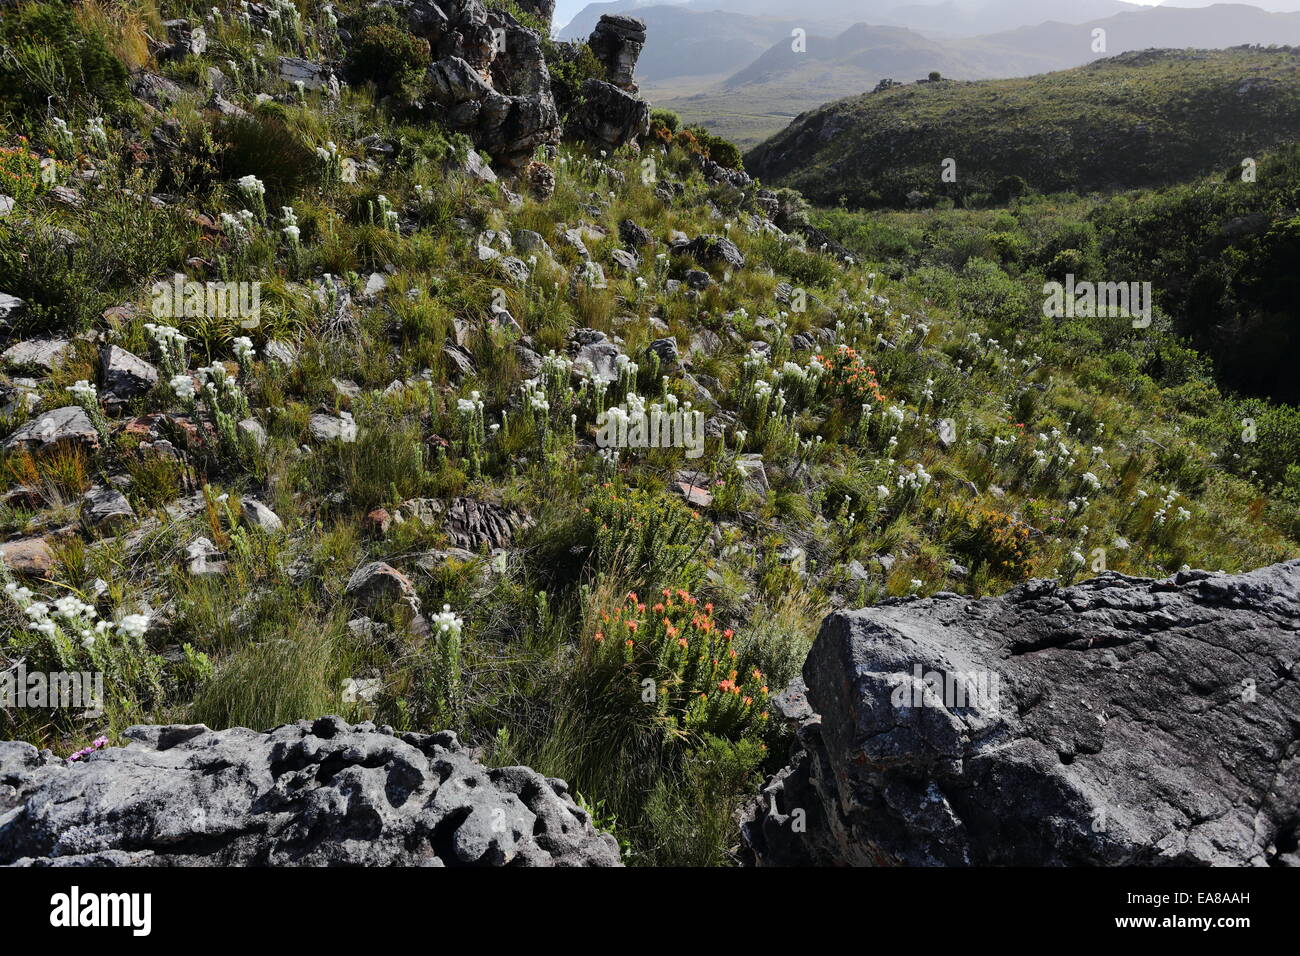 Spring mountain scene in the Kogelberg Mountains, South Africa Stock Photo